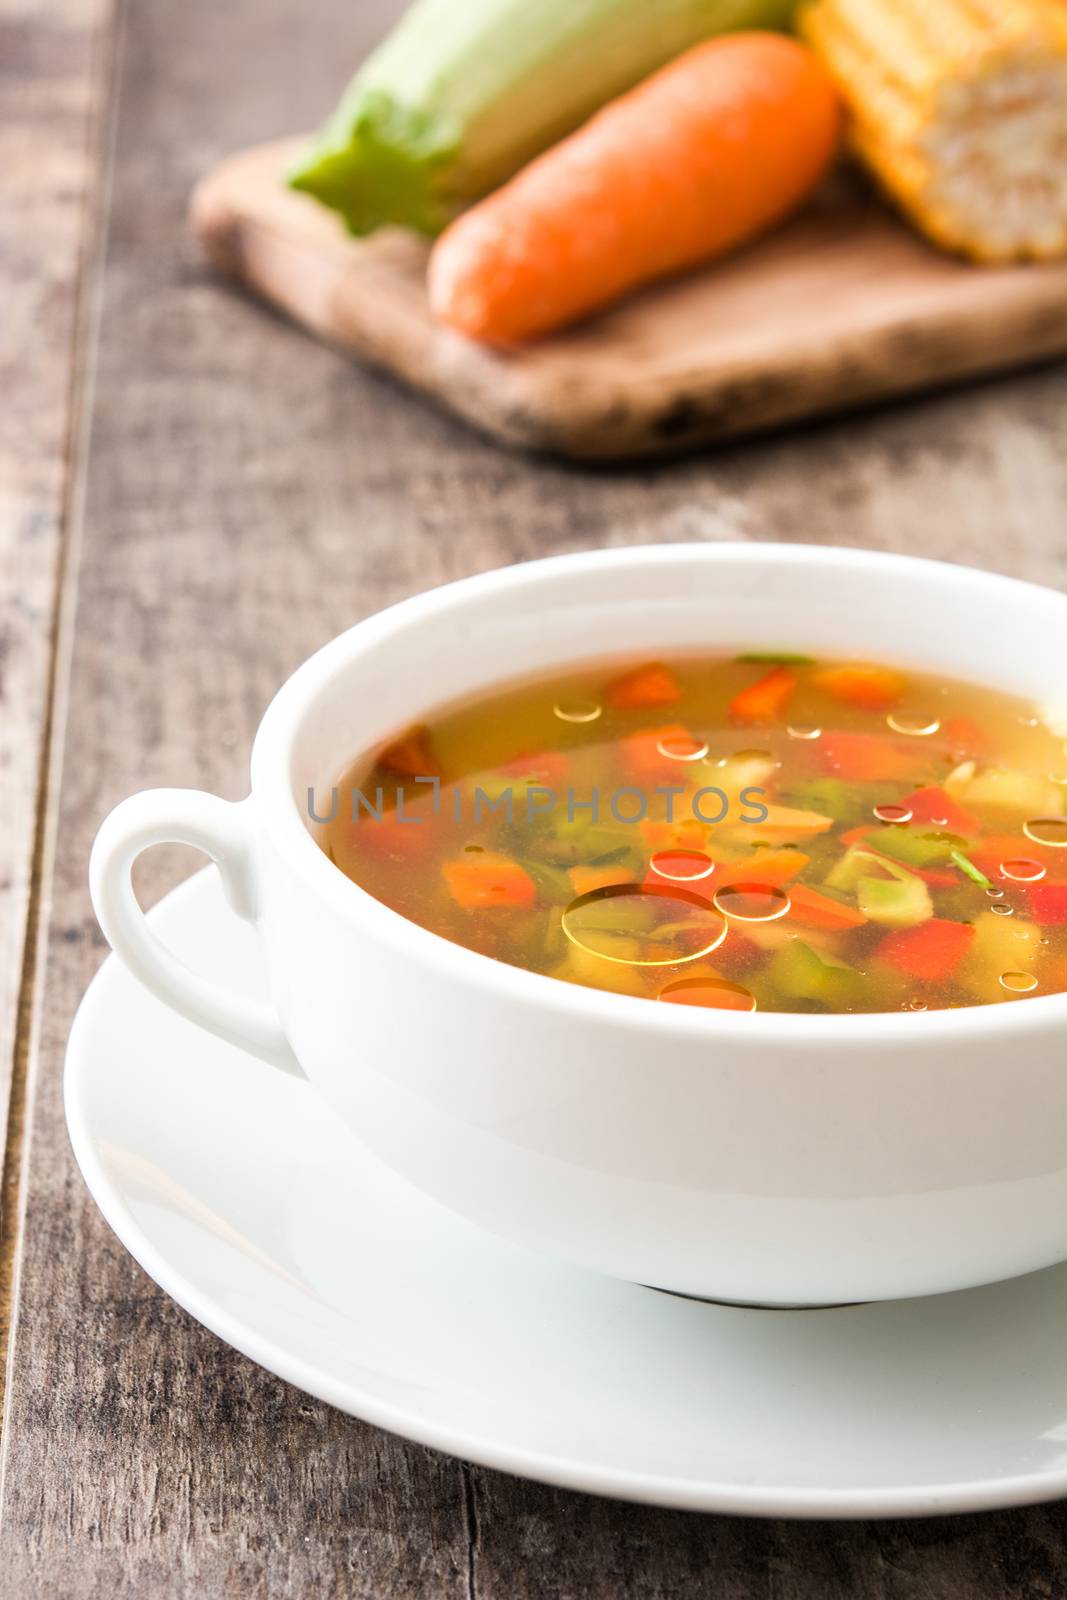 Vegetable soup in bowl on wooden table by chandlervid85